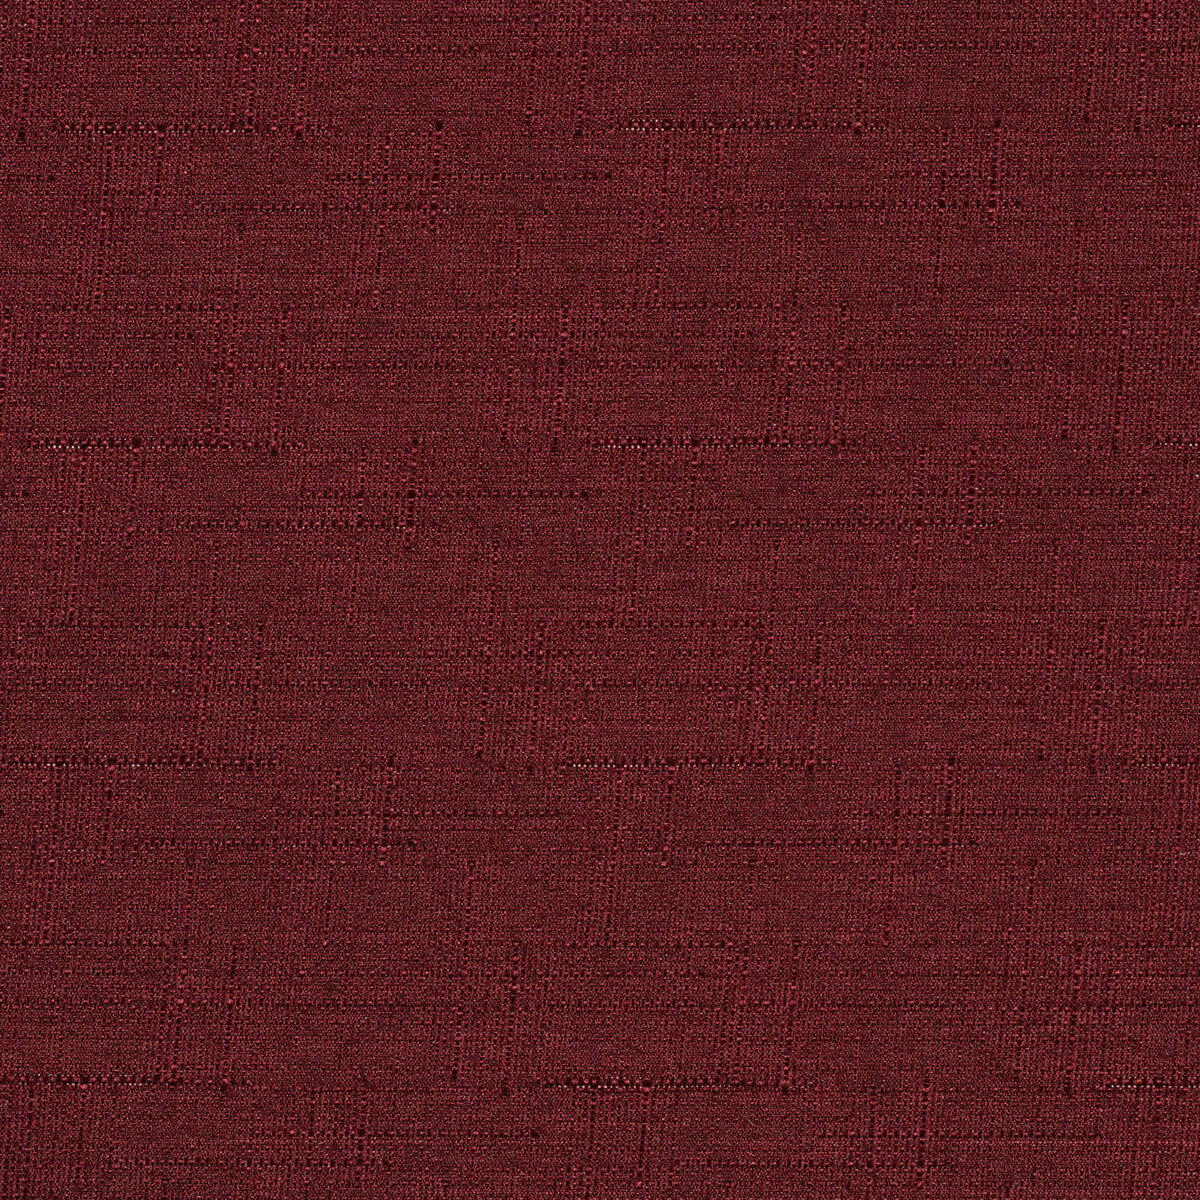 Kravet Contract fabric in 4321-9 color - pattern 4321.9.0 - by Kravet Contract